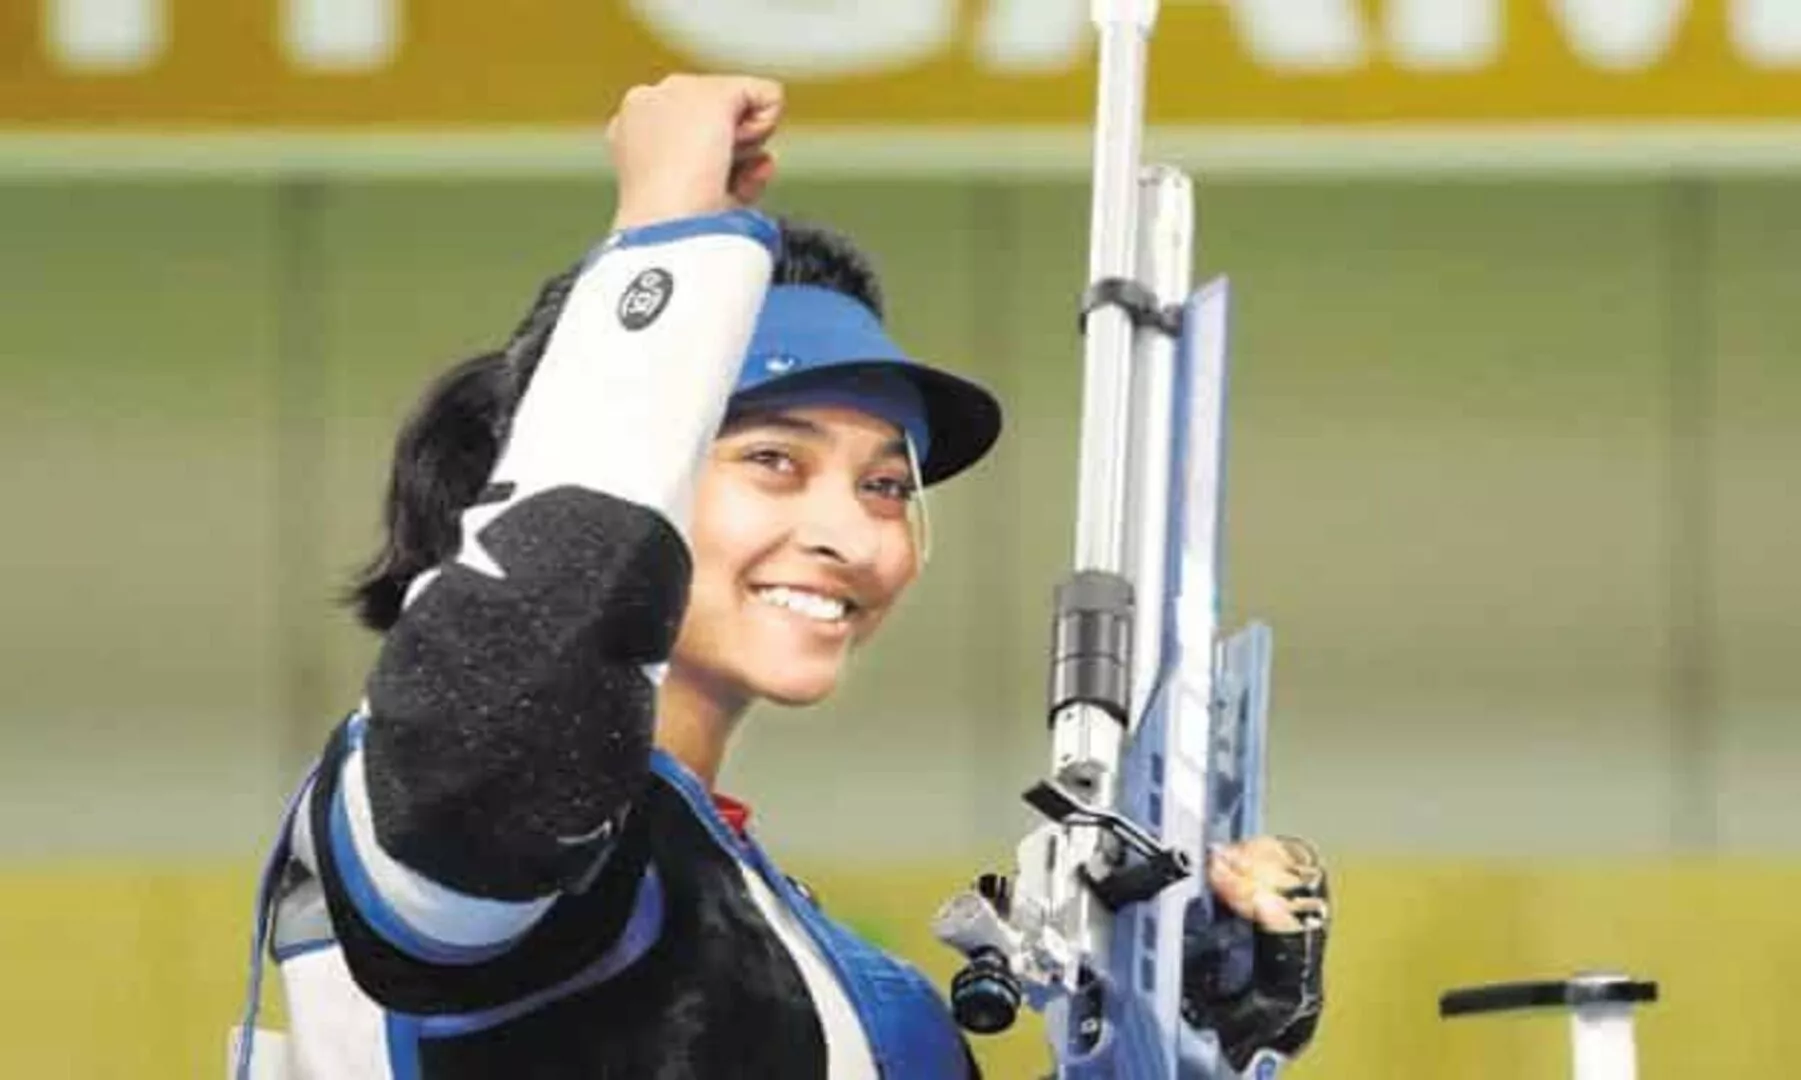 Mehuli Ghosh wins Gold in 10m air rifle at National Games 2023, credits bananas for energy boost